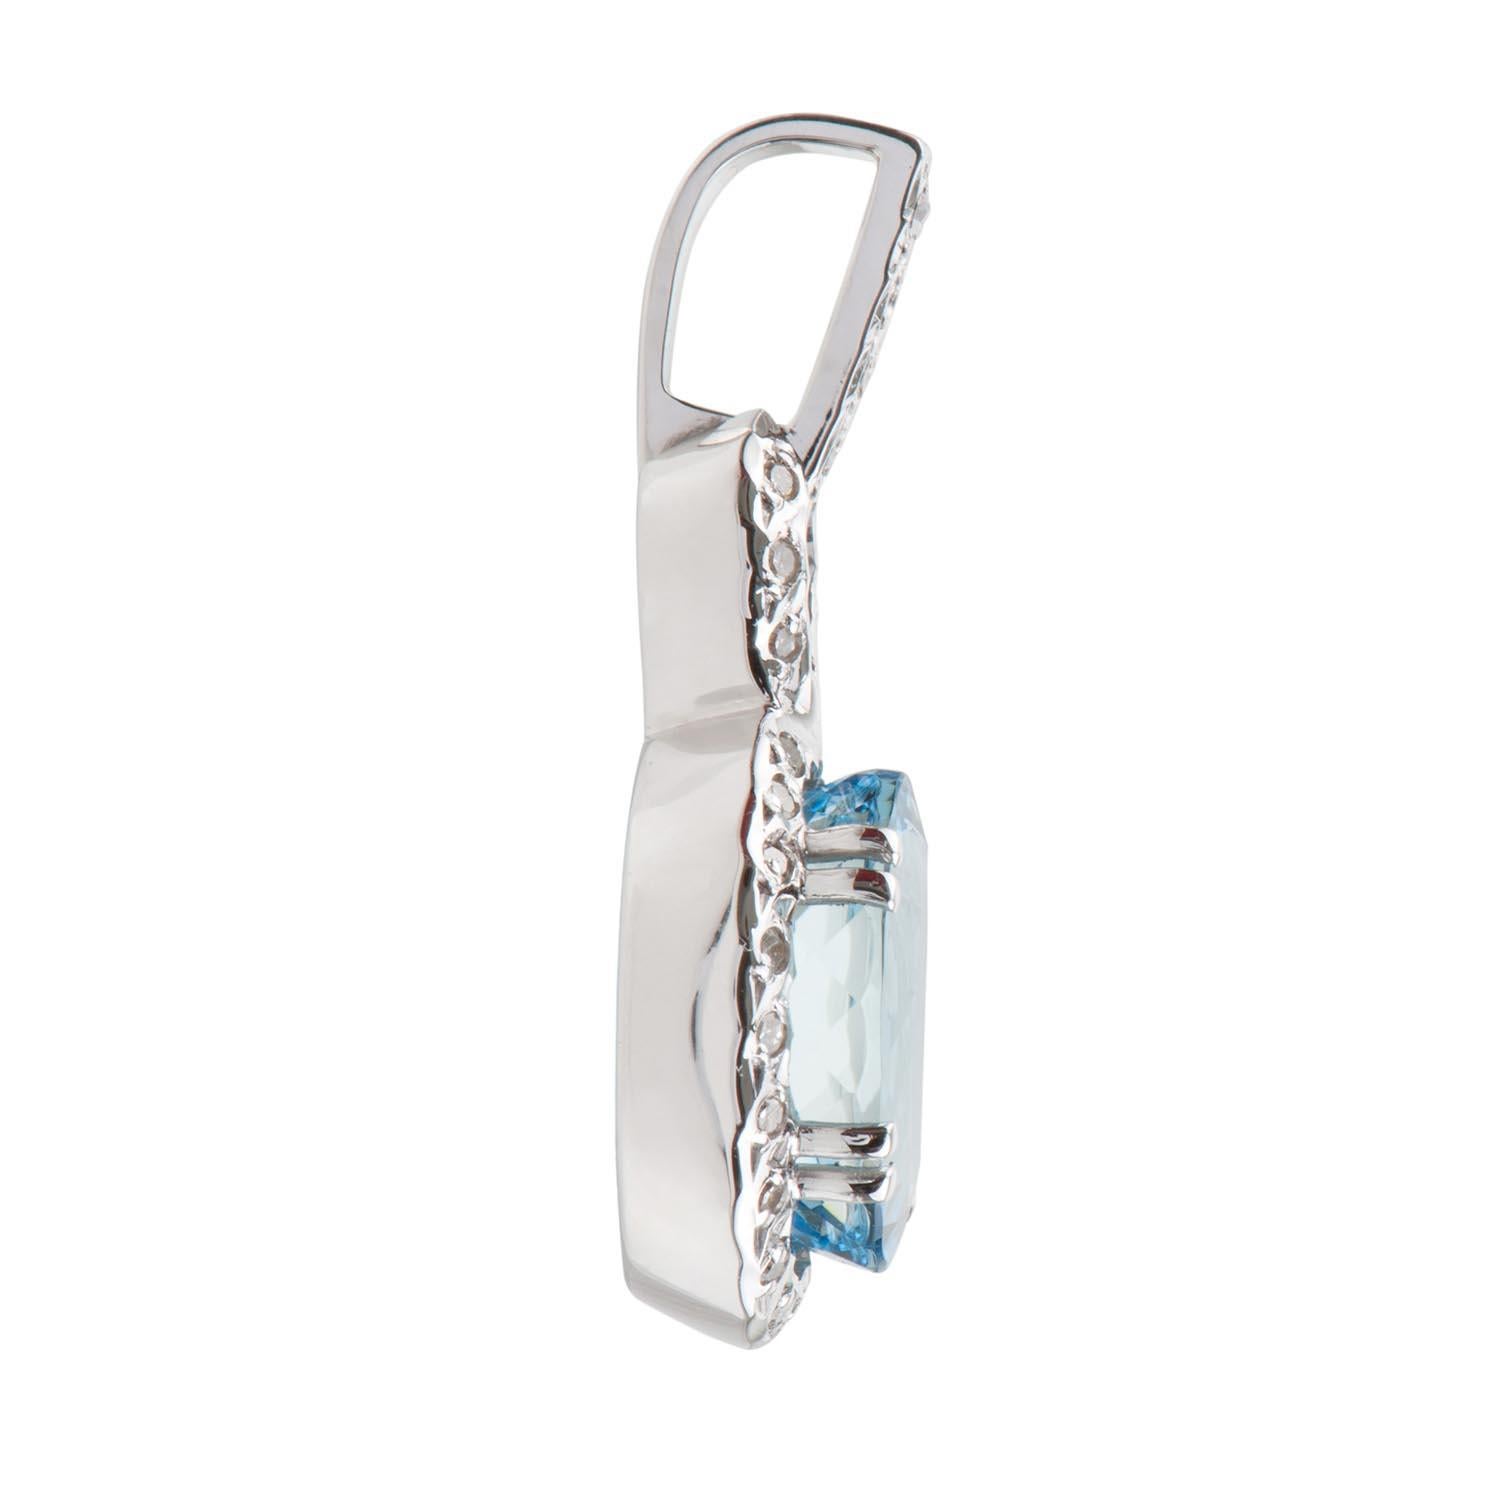 The Aquamarine Pendant has been crafted with a beautiful gemstone (3.74cts) and solid 18k white gold (4.17grs). We have also used internationally graded VS2 diamonds with a total weight of 0.12cts.

It is a unique piece that can accompany you in